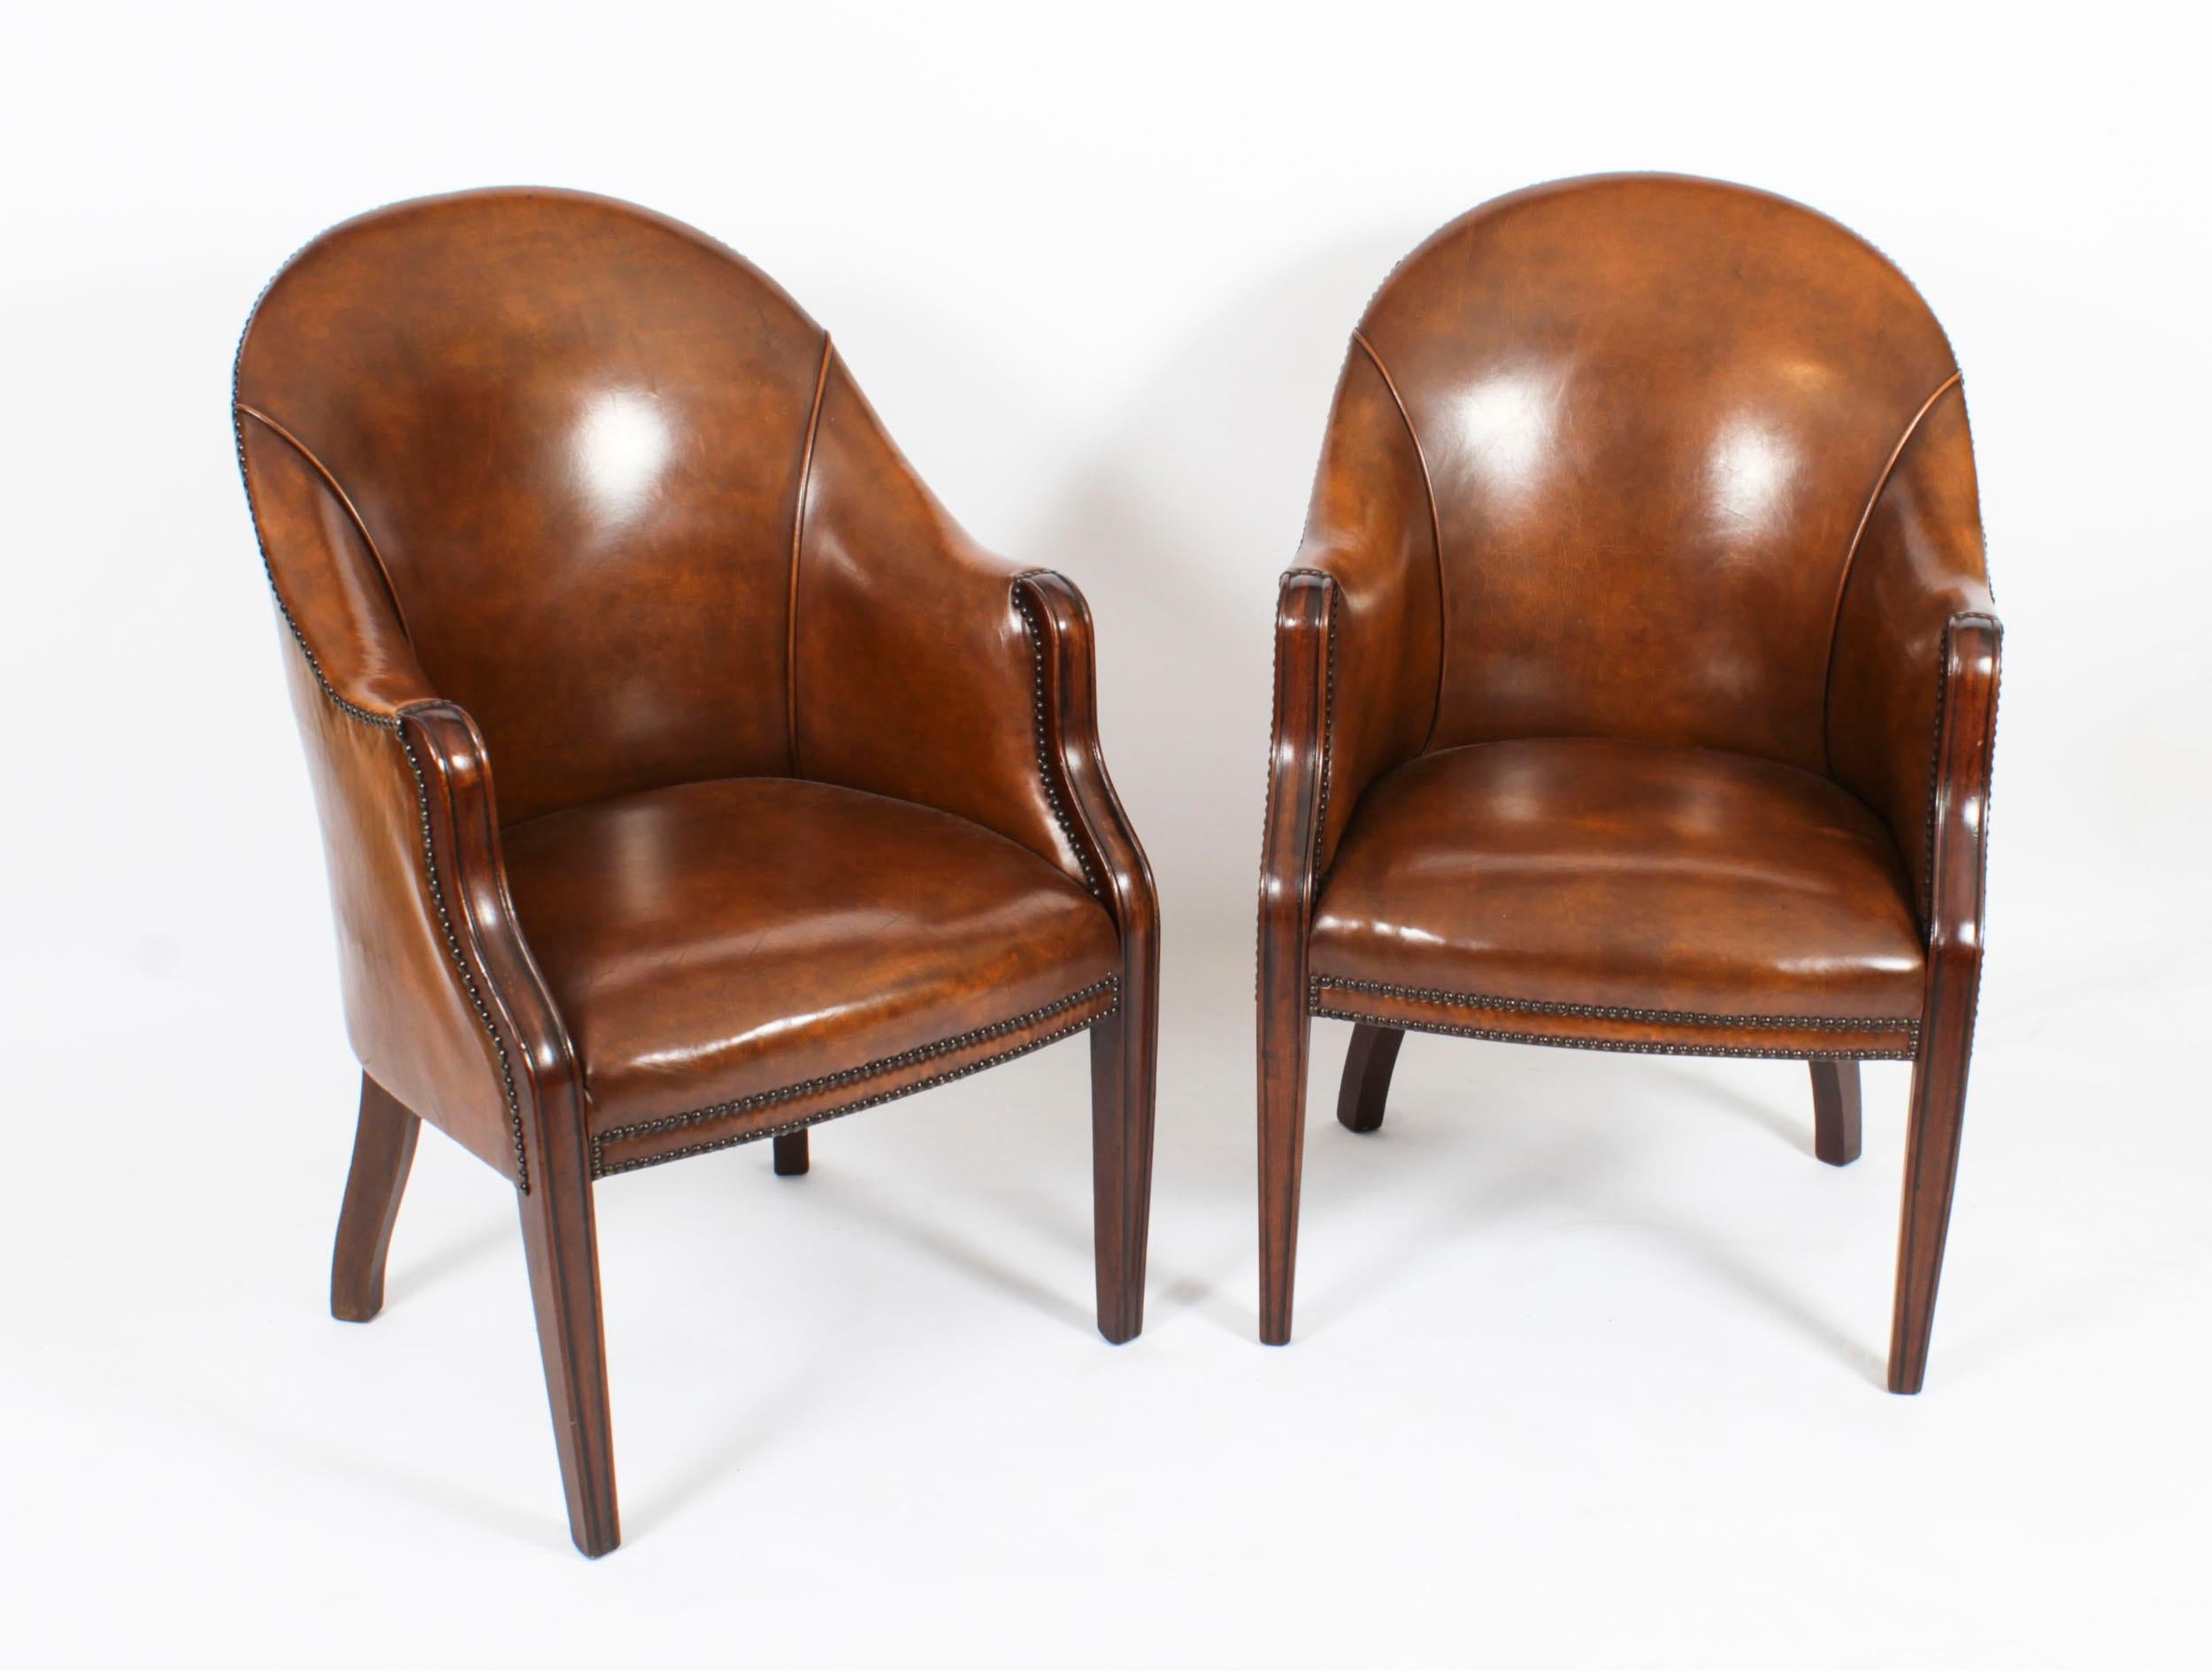 Vintage Pair English Regency Revival Leather Desk Chairs, Mid-20th Century 11